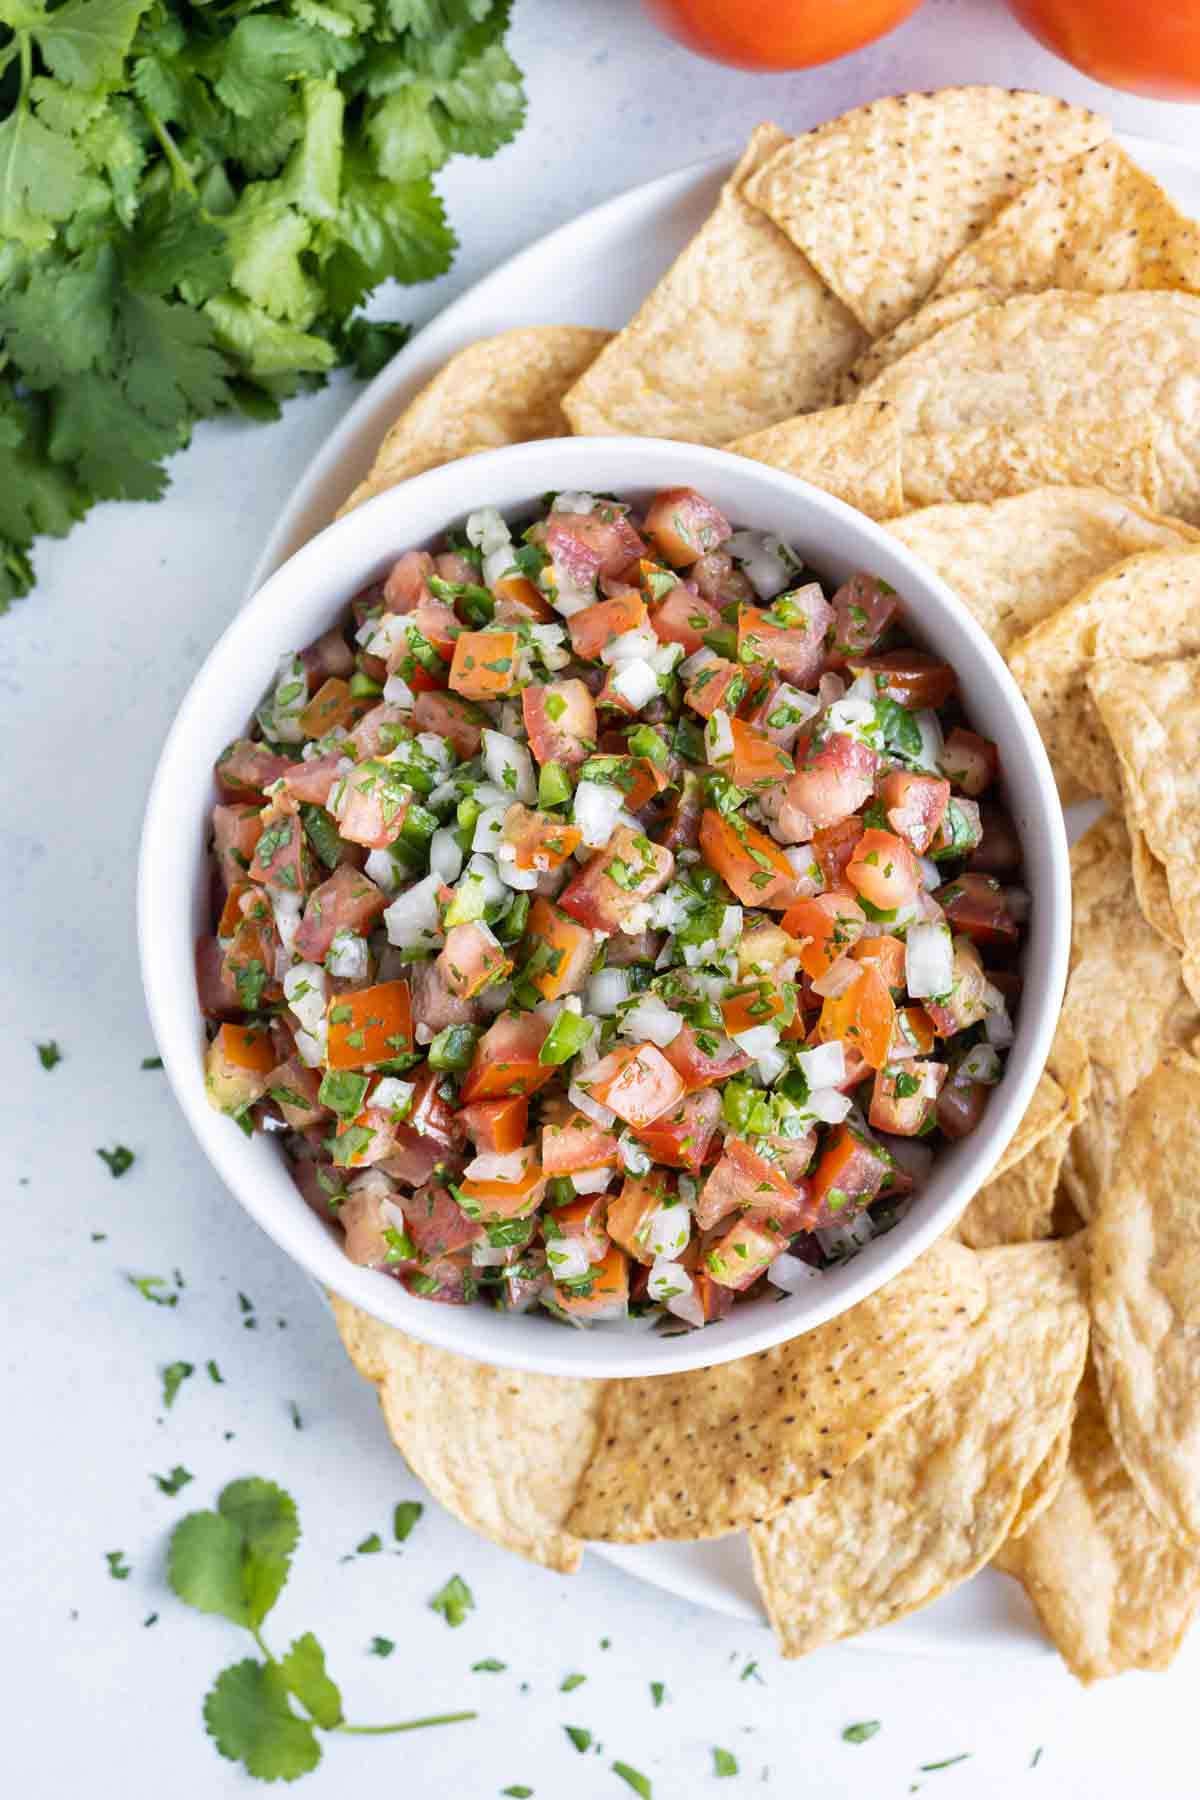 Pico de gallo is served with tortilla chips for a healthy Mexican appetizer.